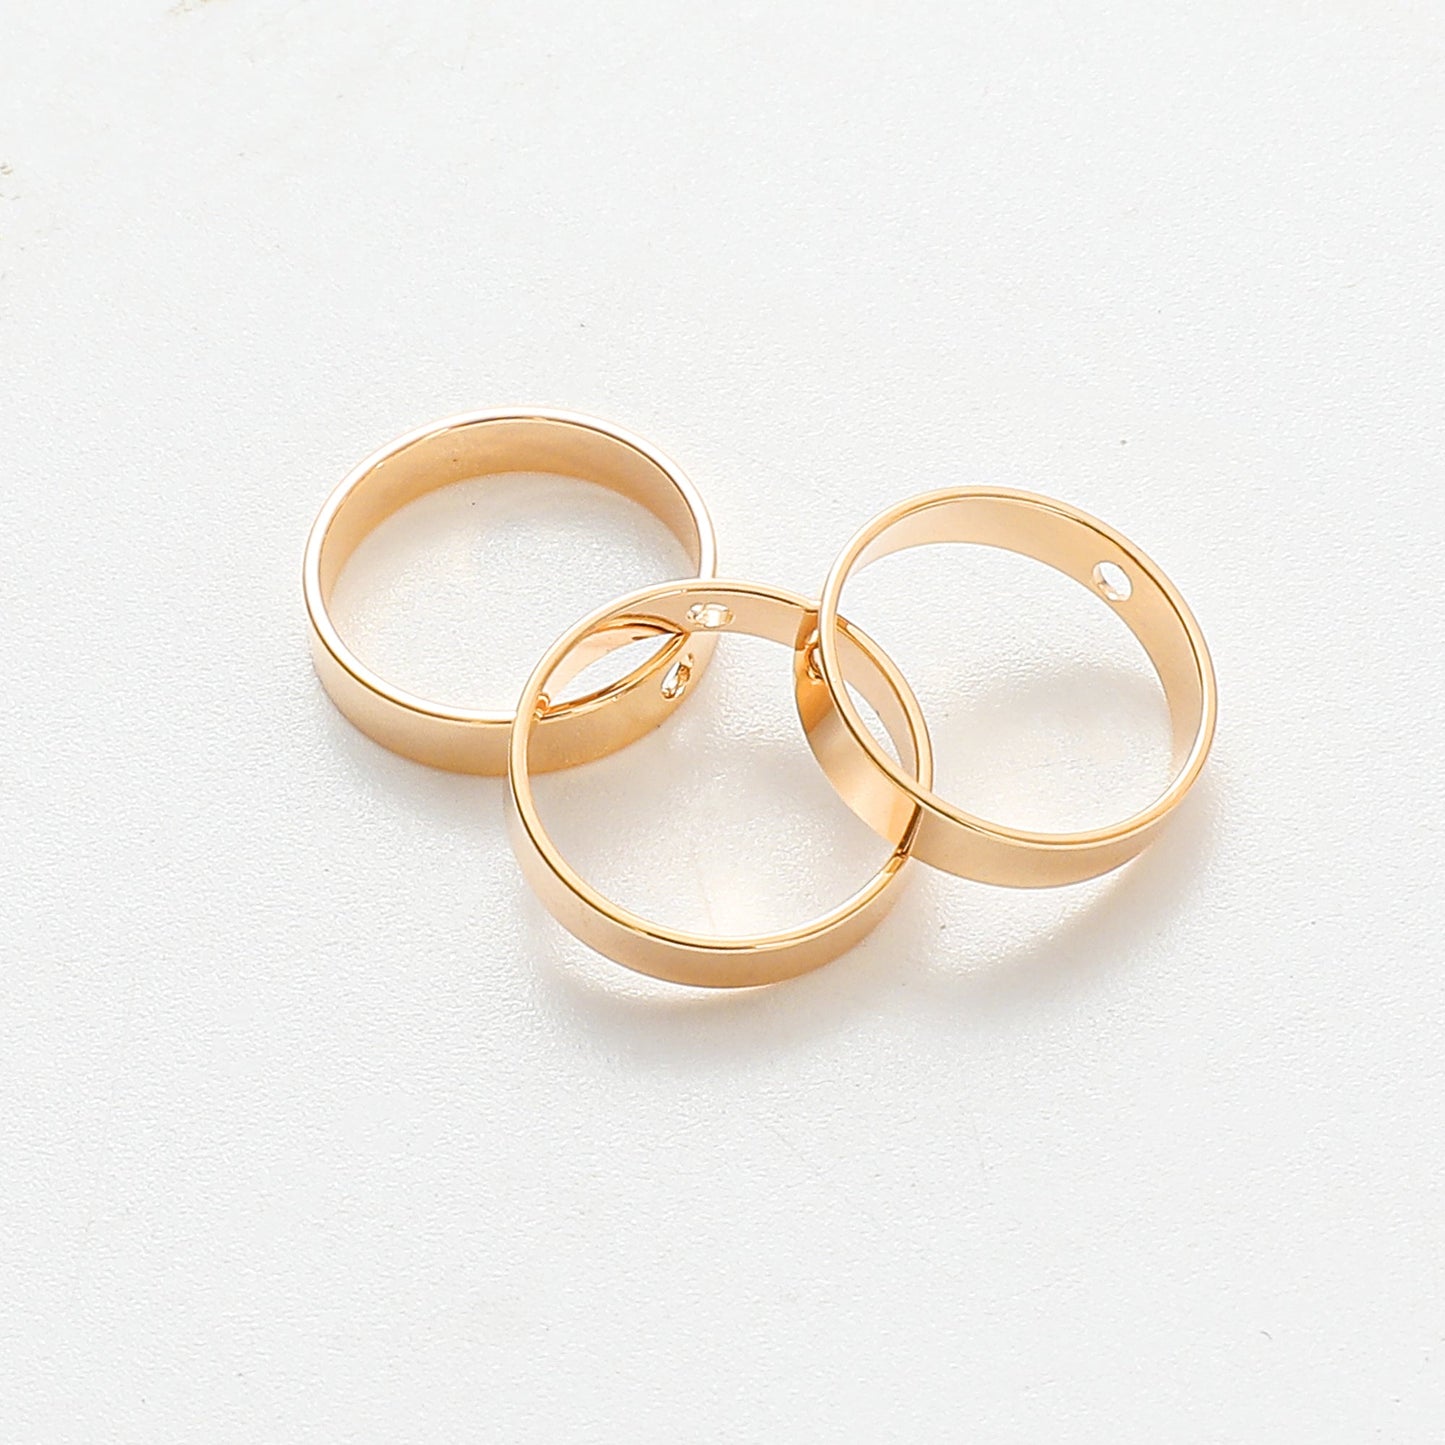 3 PCs/PK Gold Filled EP Circle Jump Rings Frame Link Jewelry Findings